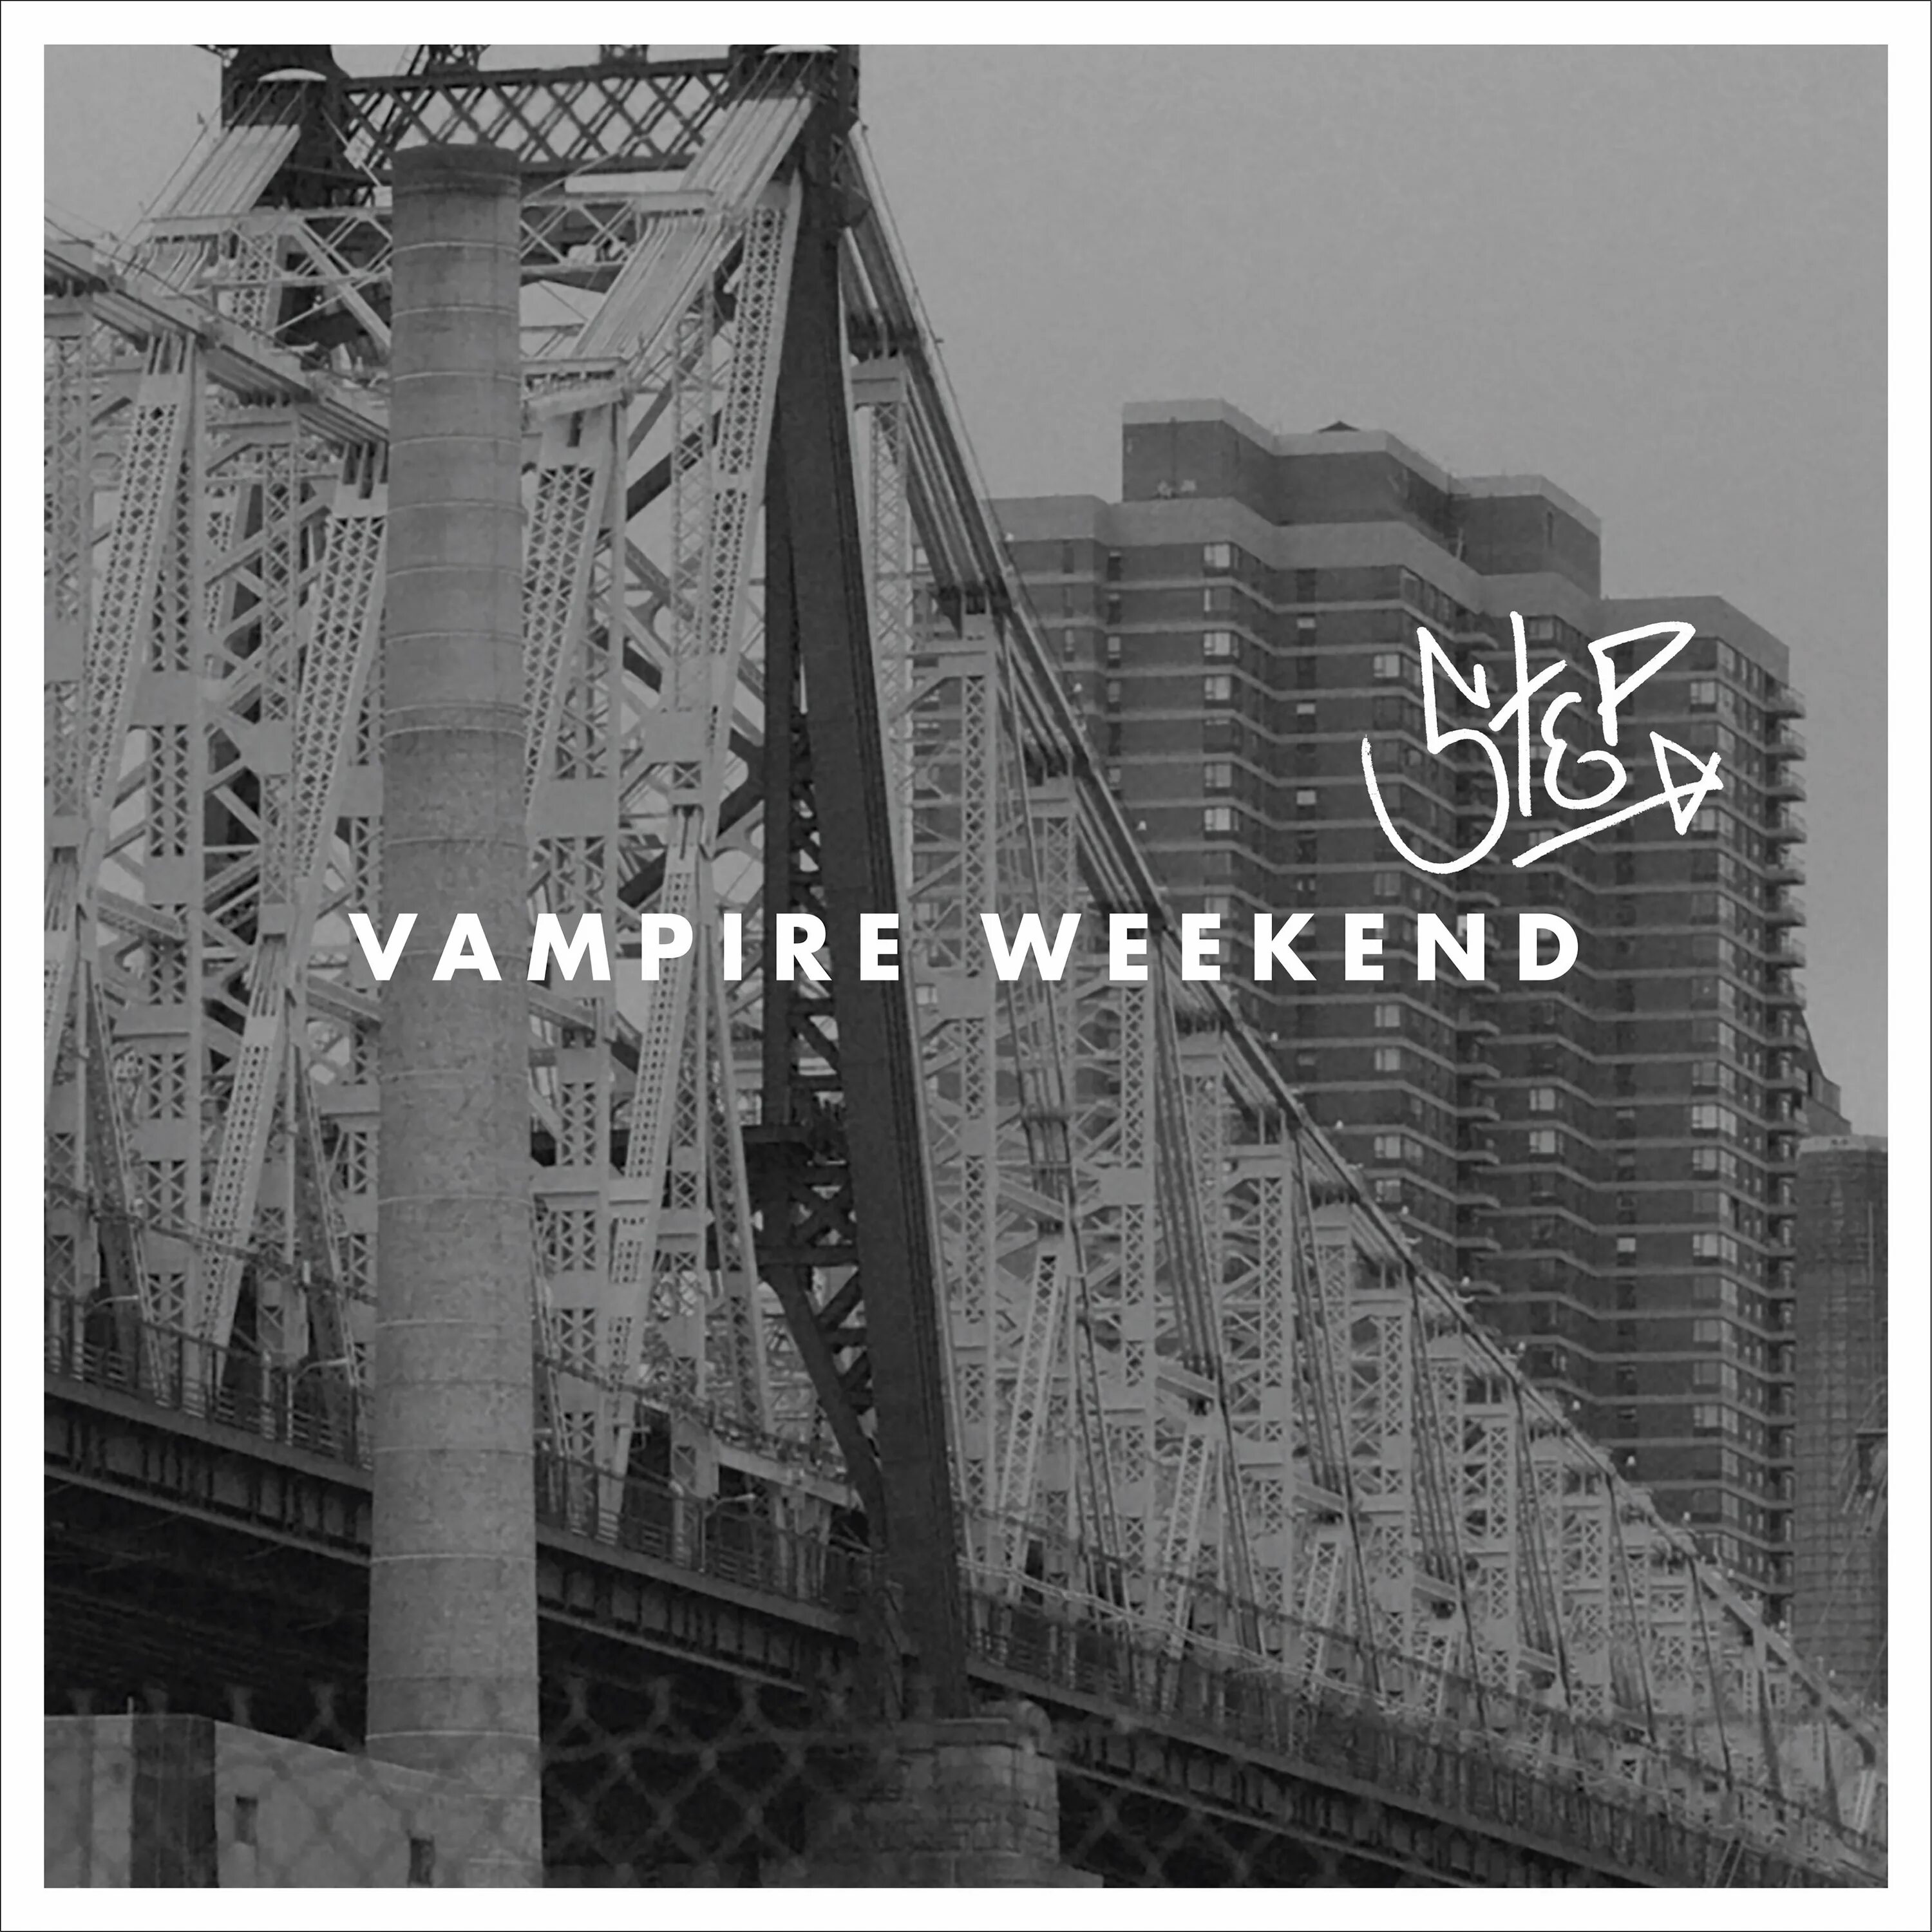 Vampire weekend only god was above us. Vampire weekend Vampire weekend 2008. Campus Vampire weekend. Vampire weekend обложка. Vampire weekend Modern Vampires of the City обложка.